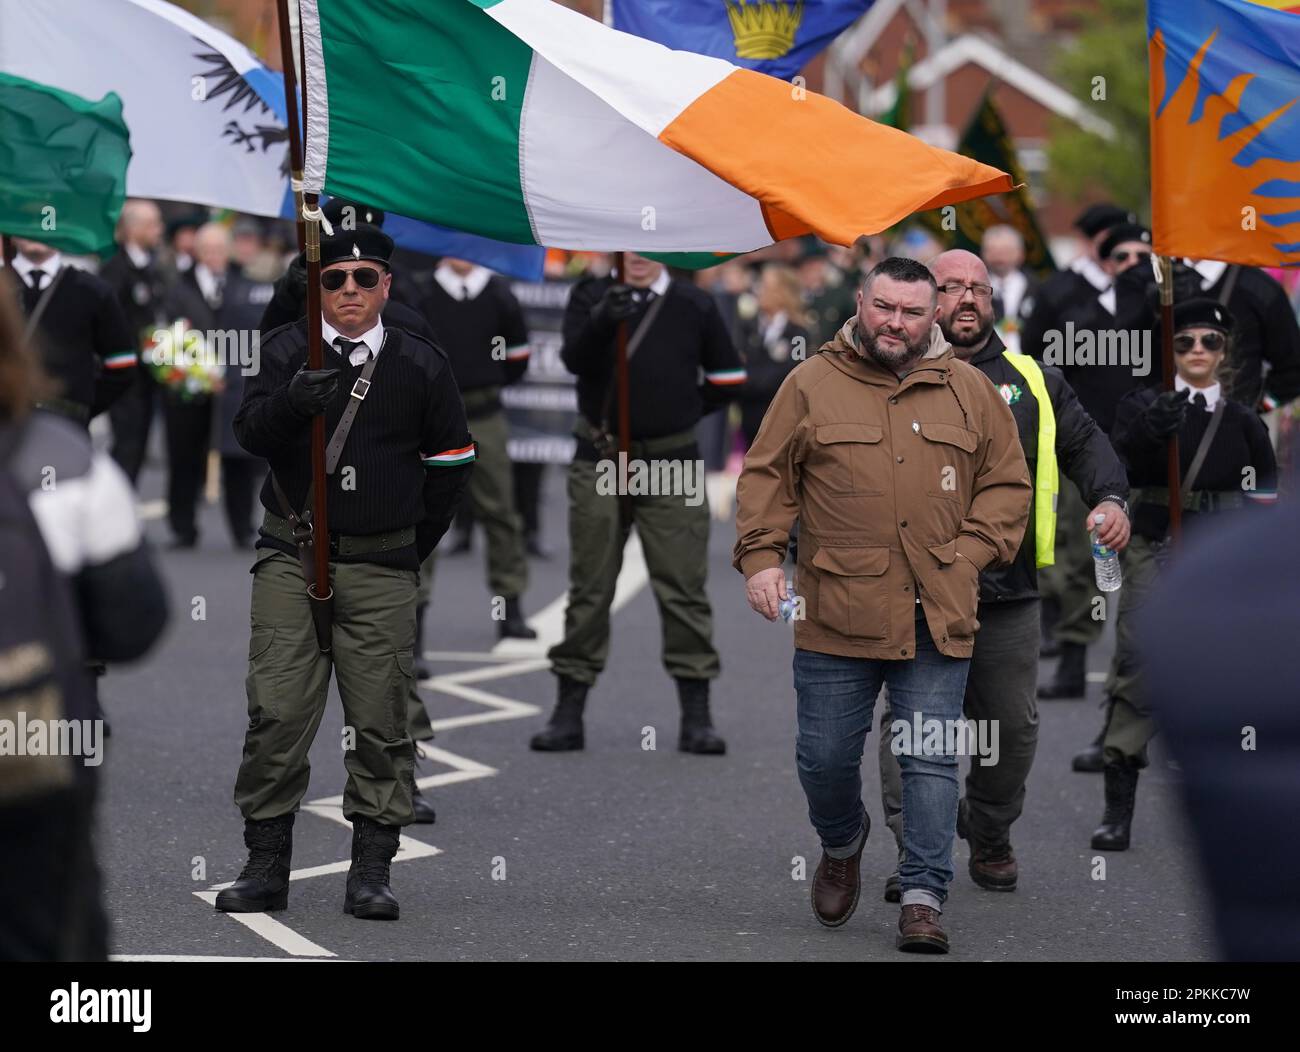 Thomas Ashe Mellon (2nd right) during an Easter commemoration parade in  Belfast. Easter parades are held annually across The Island of Ireland by  Republicans to commemorate the 1916 Easter Rising in Dublin